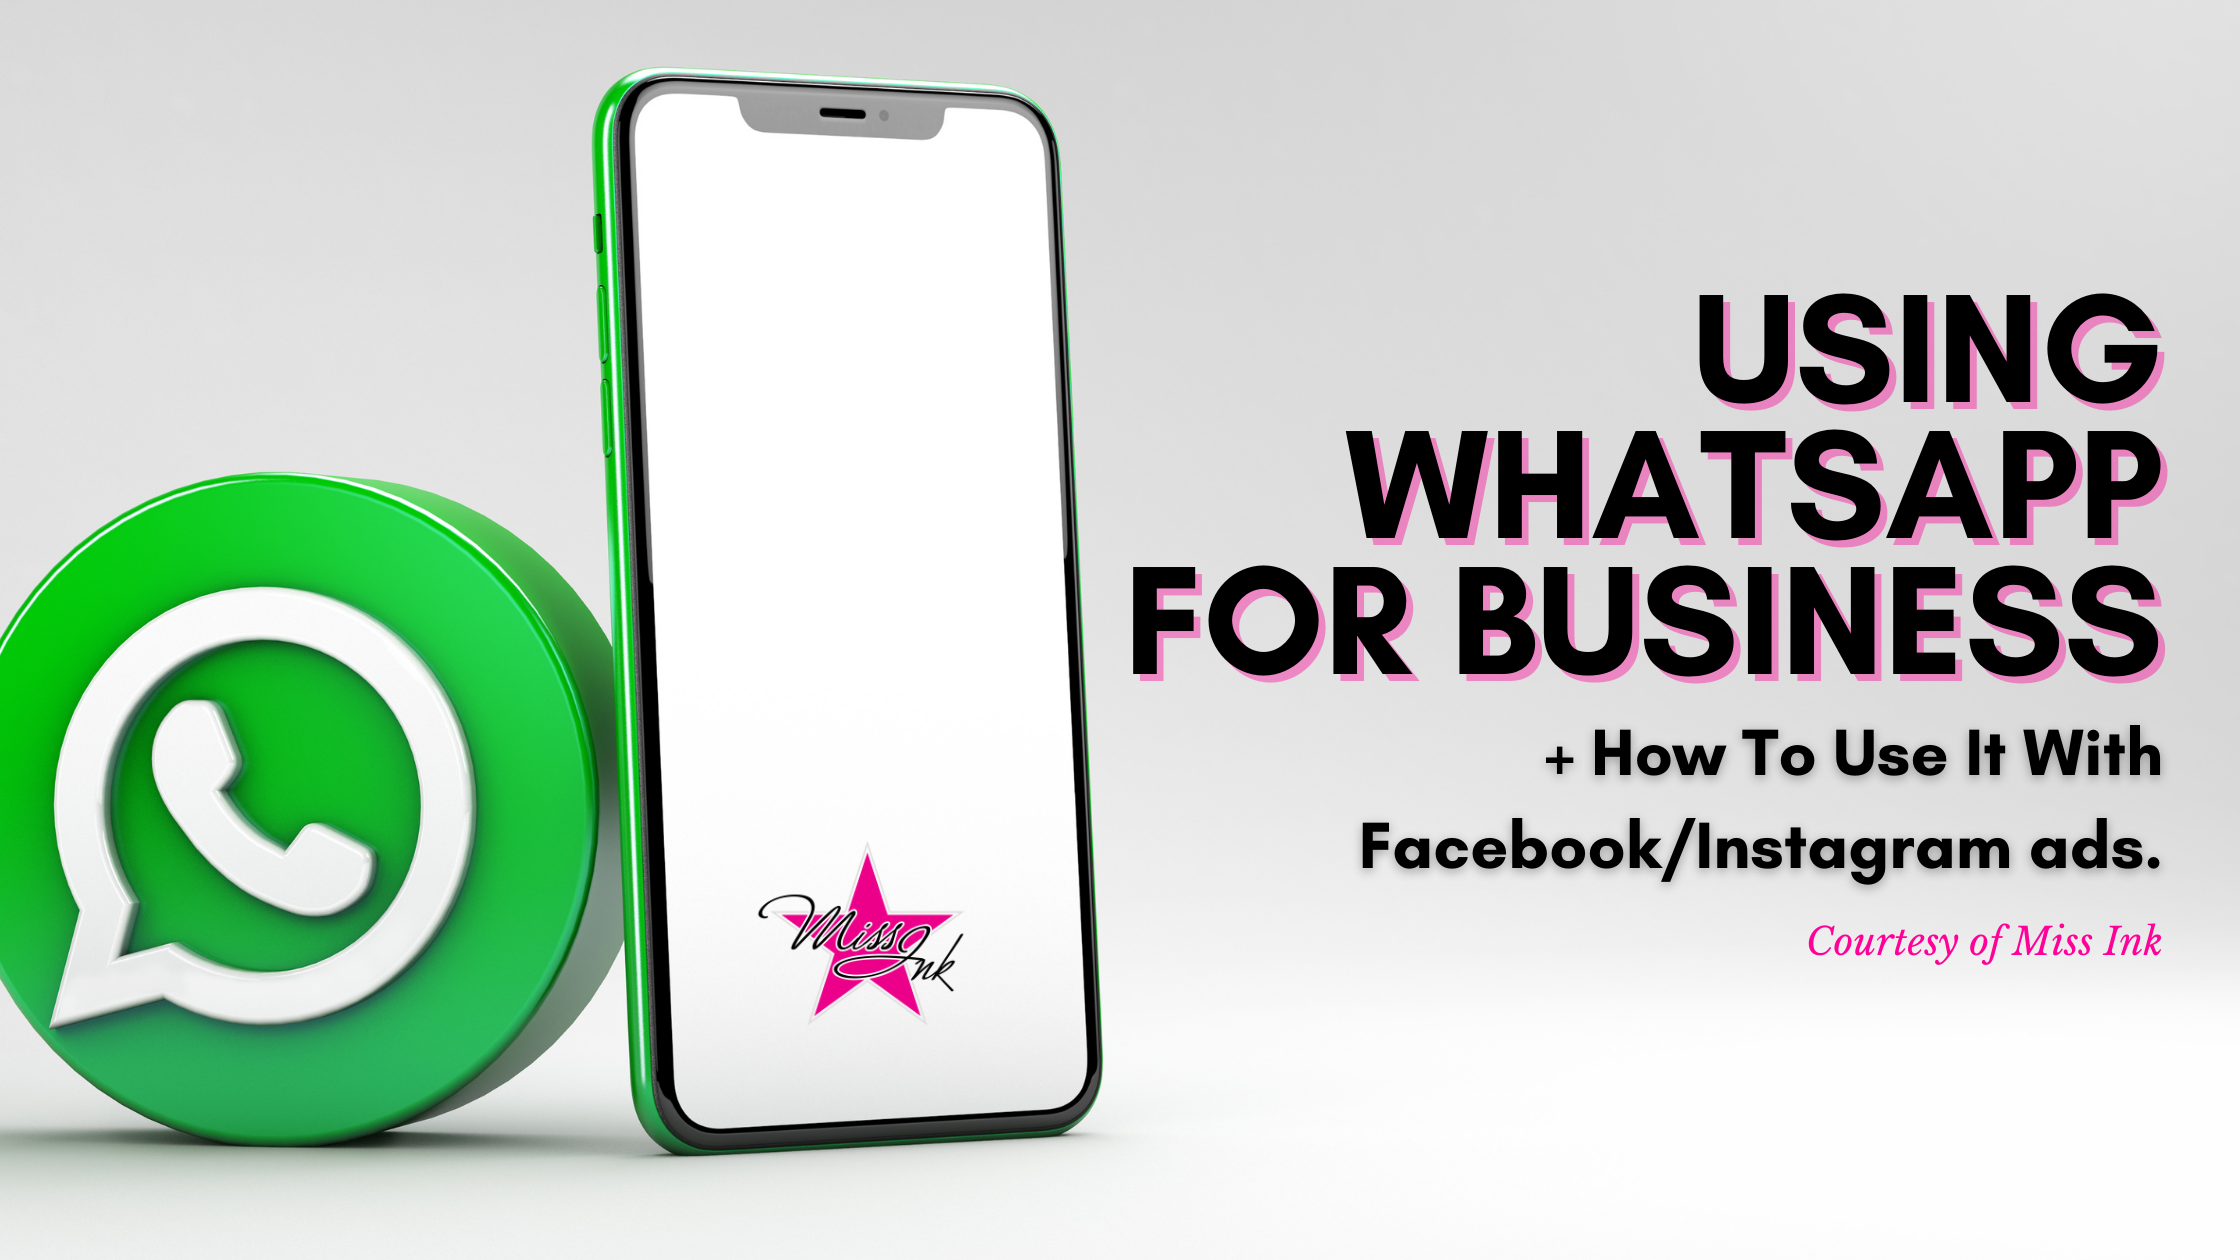 Using WhatsApp For Business + How To Use It With Facebook/Instagram Ads.